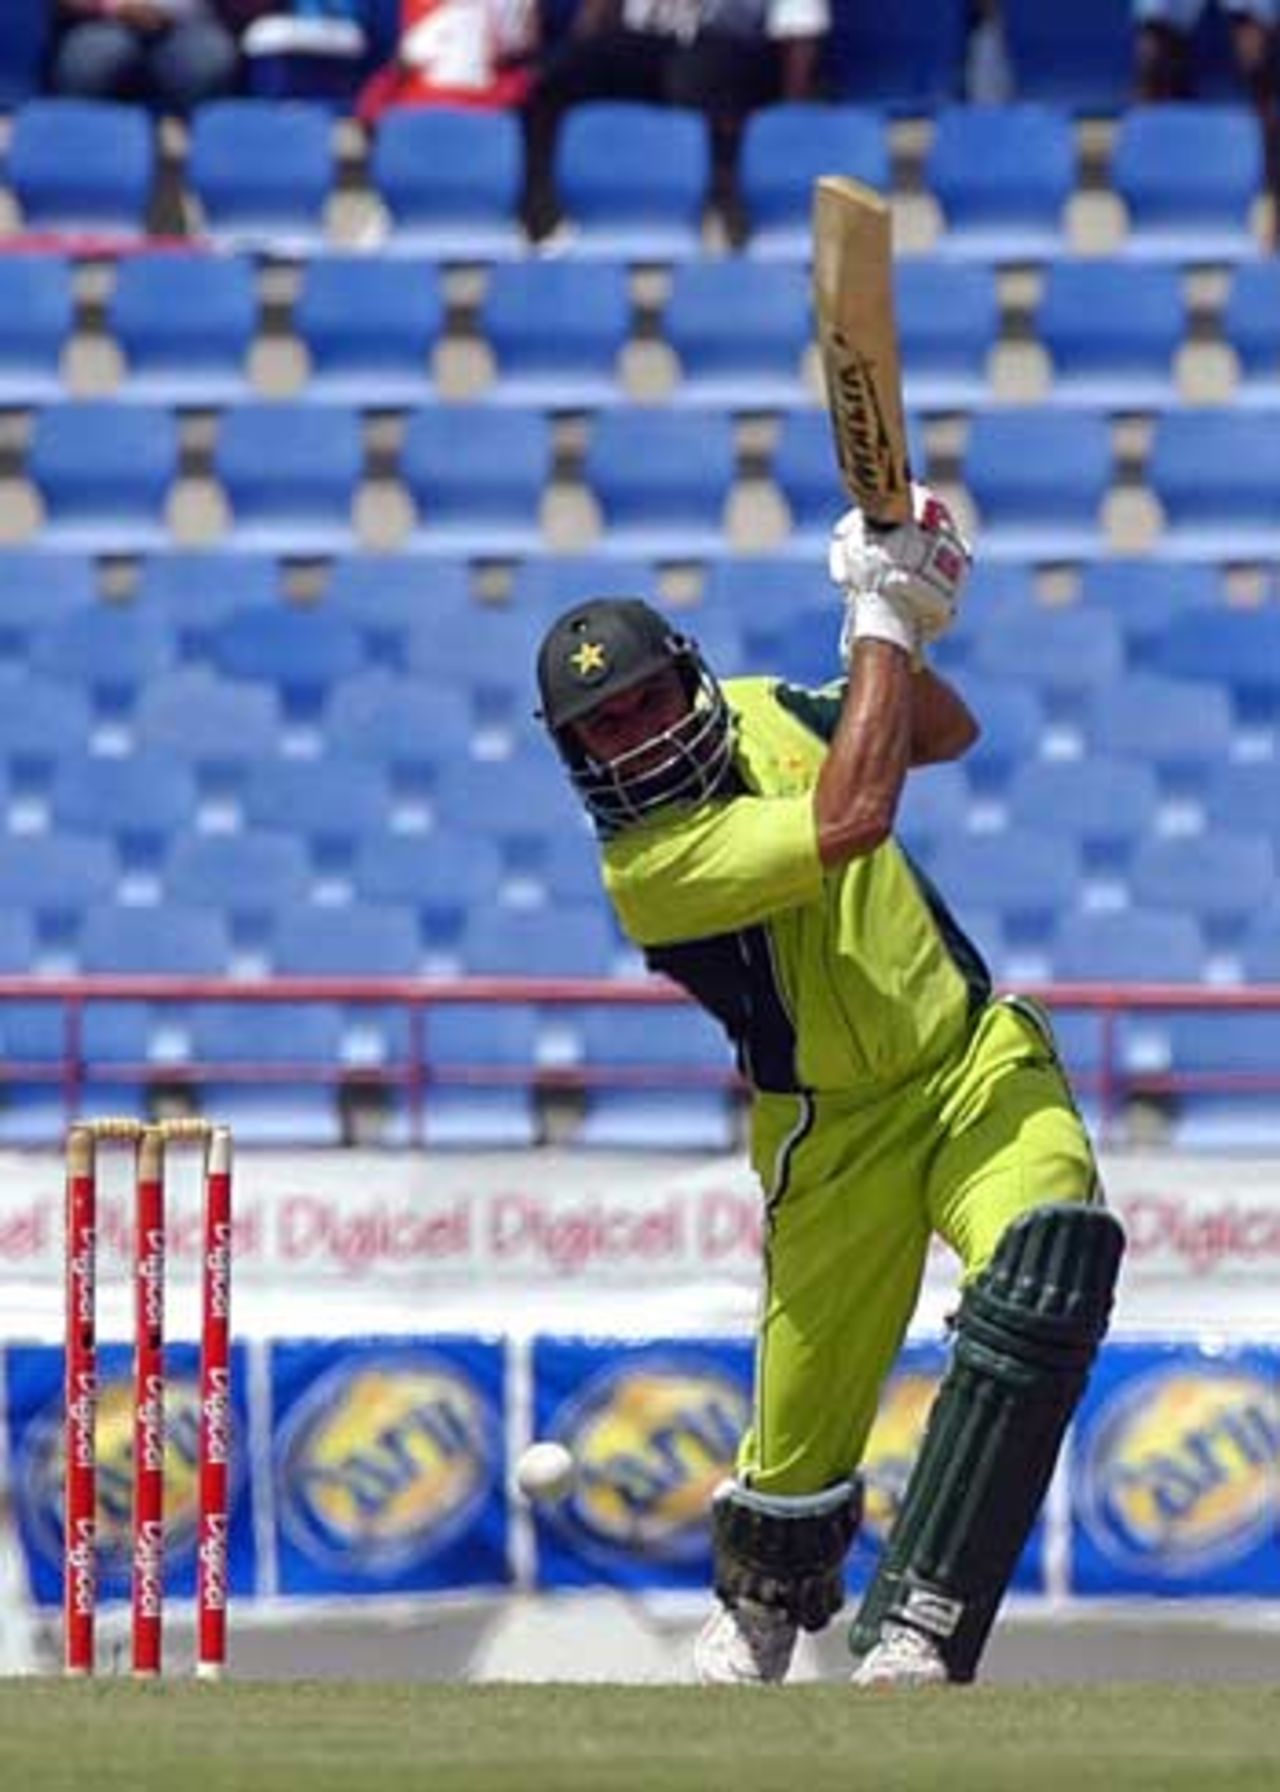 Shahid Afridi hits out on the way to his 27-ball 50 against West Indies, West Indies v Pakistan, 3rd ODI, St Lucia